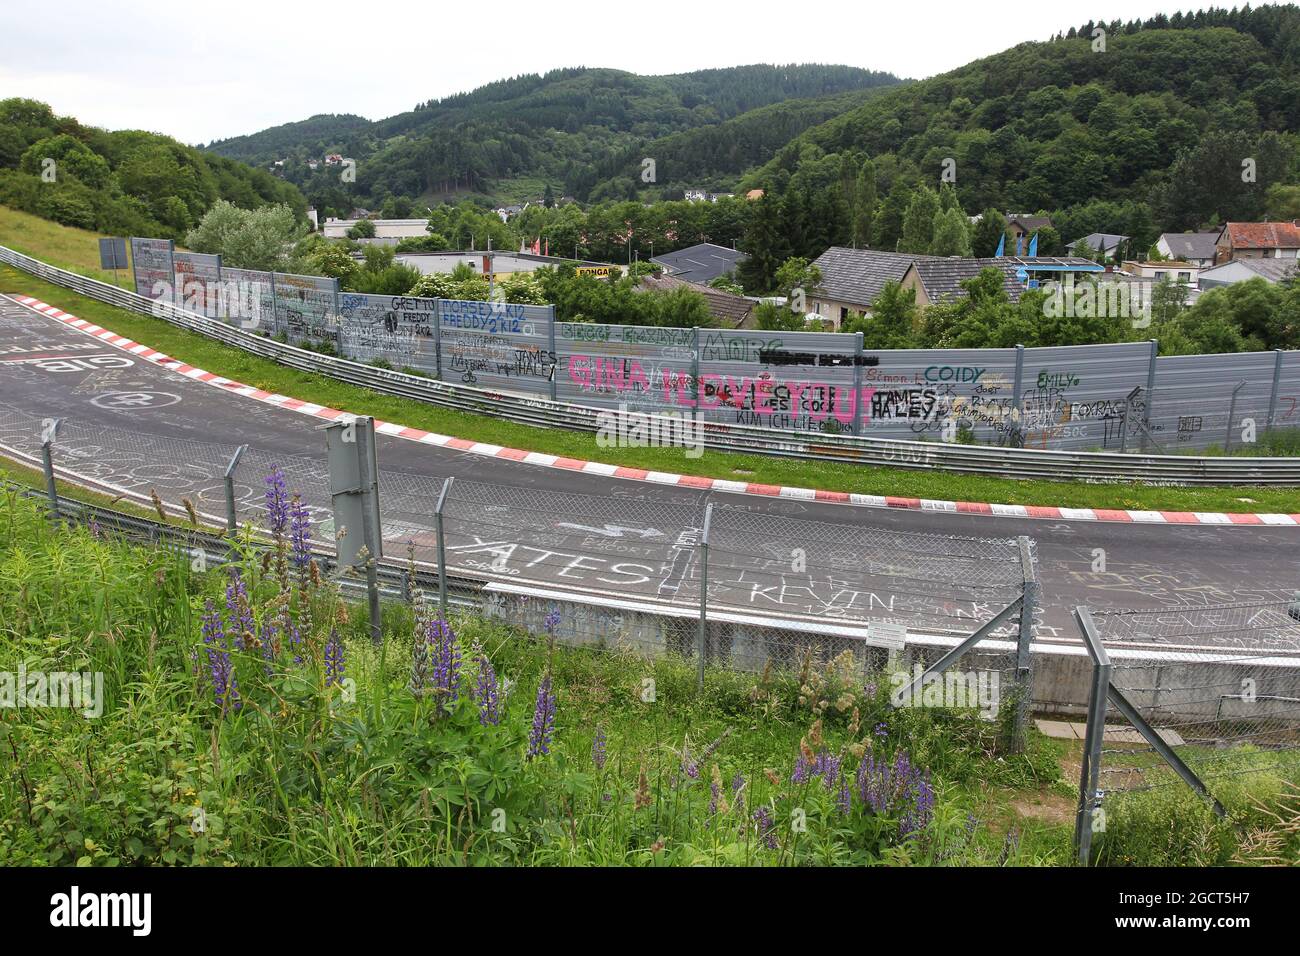 The Nordschleife. German Grand Prix, Friday 5th July 2013. Nurburgring, Germany. Stock Photo